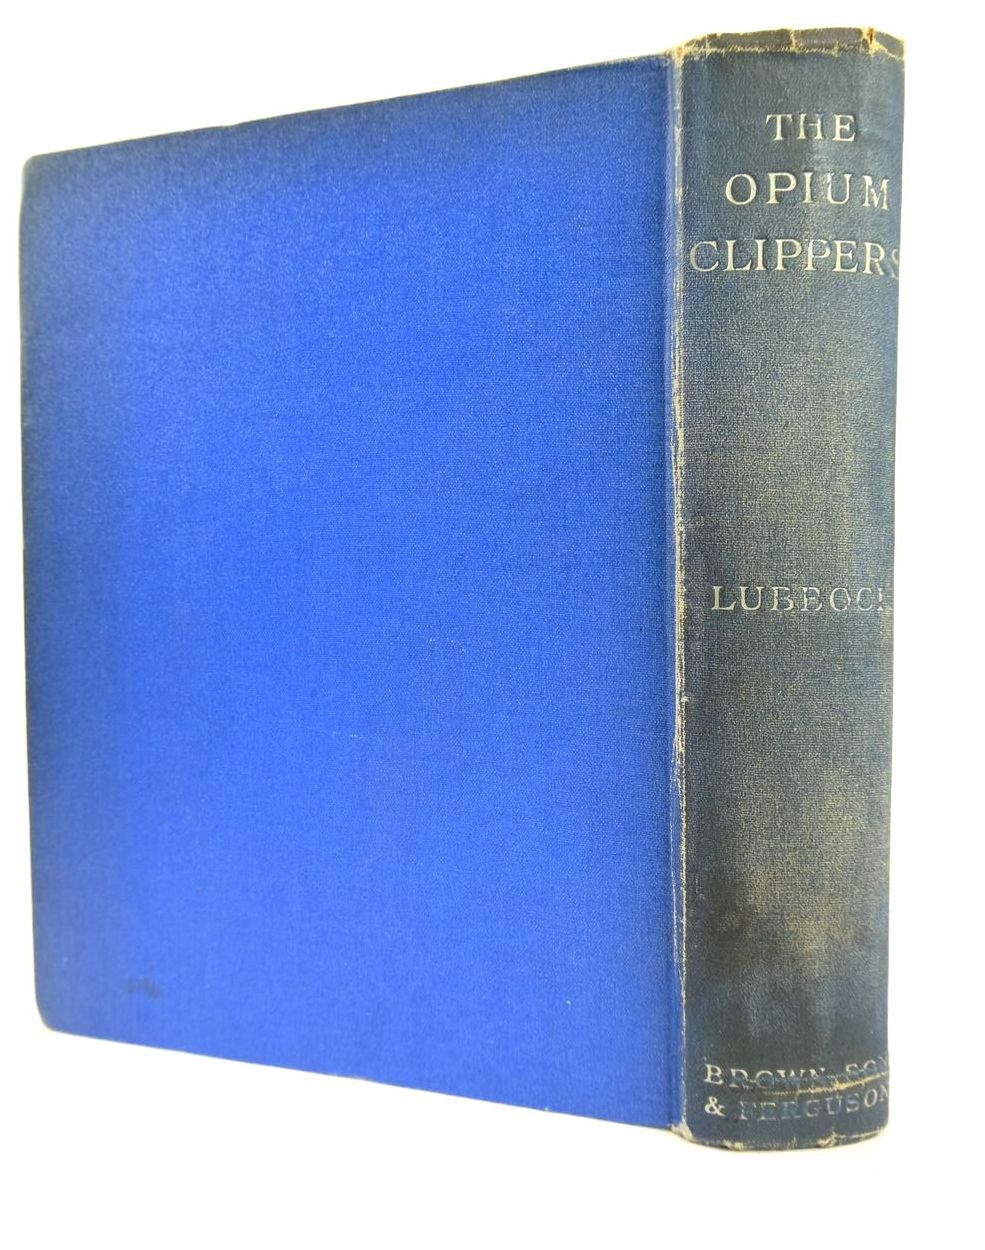 Photo of THE OPIUM CLIPPERS written by Lubbock, Basil published by Brown, Son & Ferguson Ltd. (STOCK CODE: 2132802)  for sale by Stella & Rose's Books